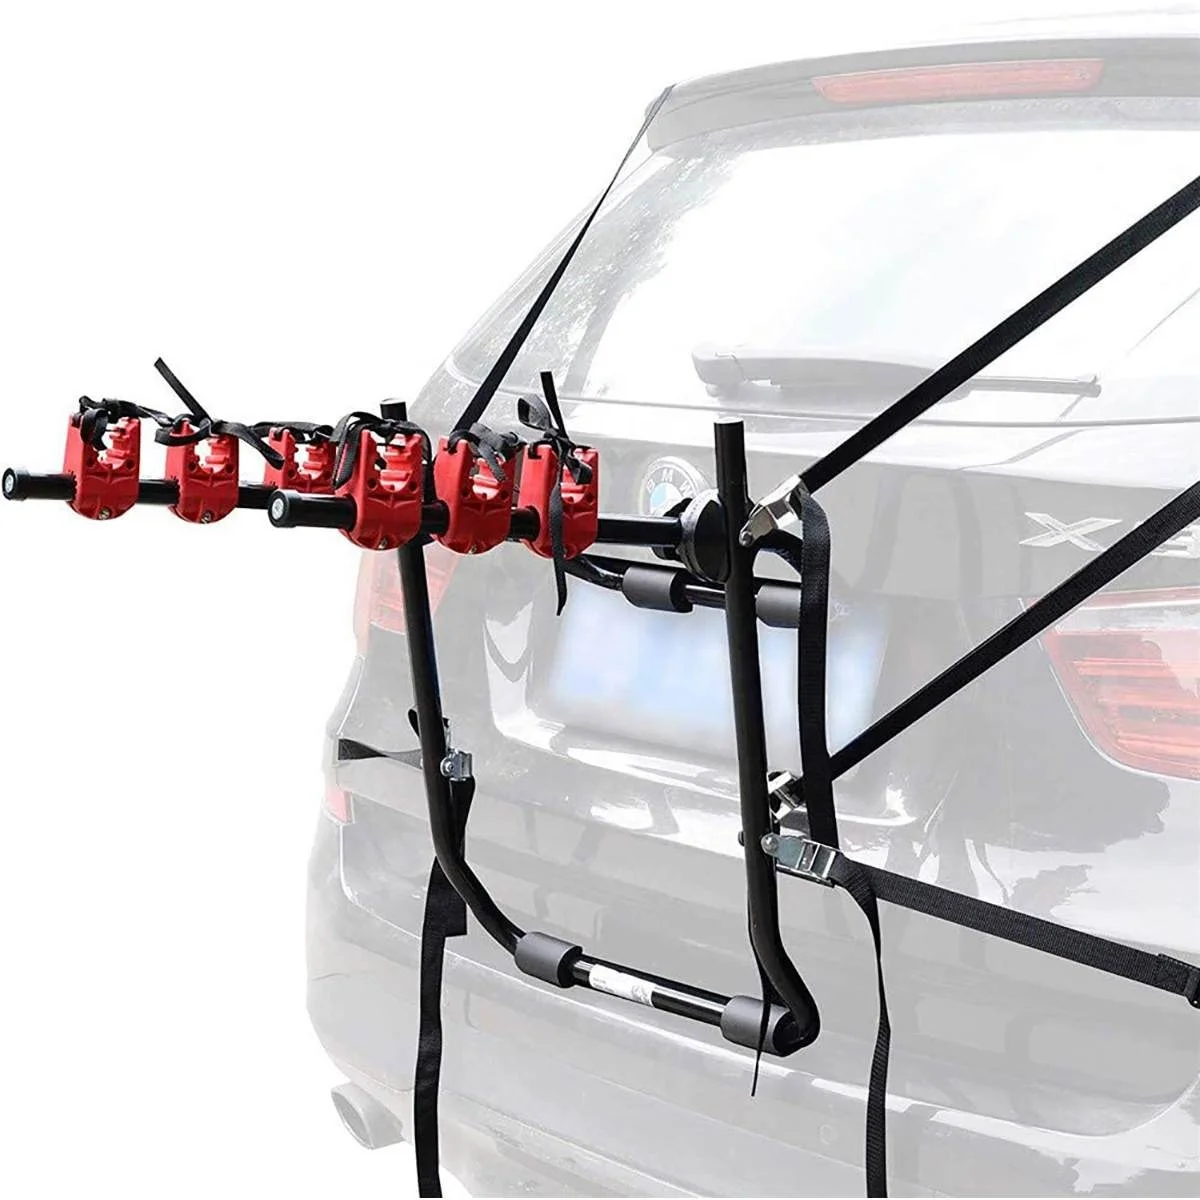 3 Bike Trunk Mount Racks Cycling Bicycle Stand Quick Installation Rack Storage Carrier Car Racks Buy Bike Rack Carrier Bike Carrier For Loaded 3 Bikes Mountain Bike Carrier Product On Alibaba Com